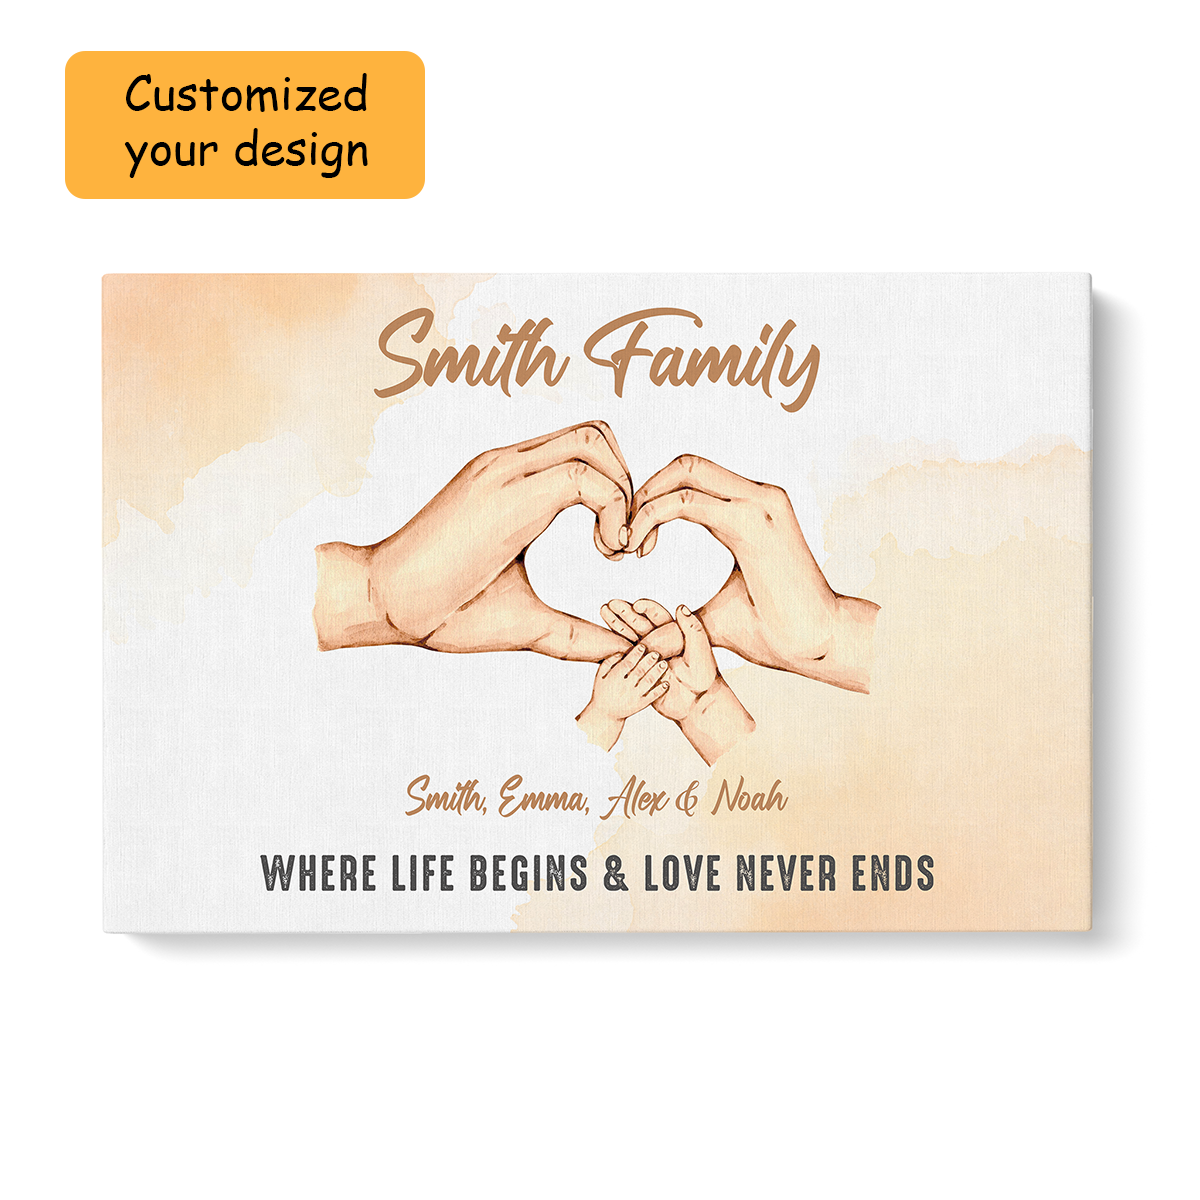 Personalized Family Hands Print Wall Art, Family Holding Hands Life Begins & Love Never Ends Canvas Hanging Home Decor